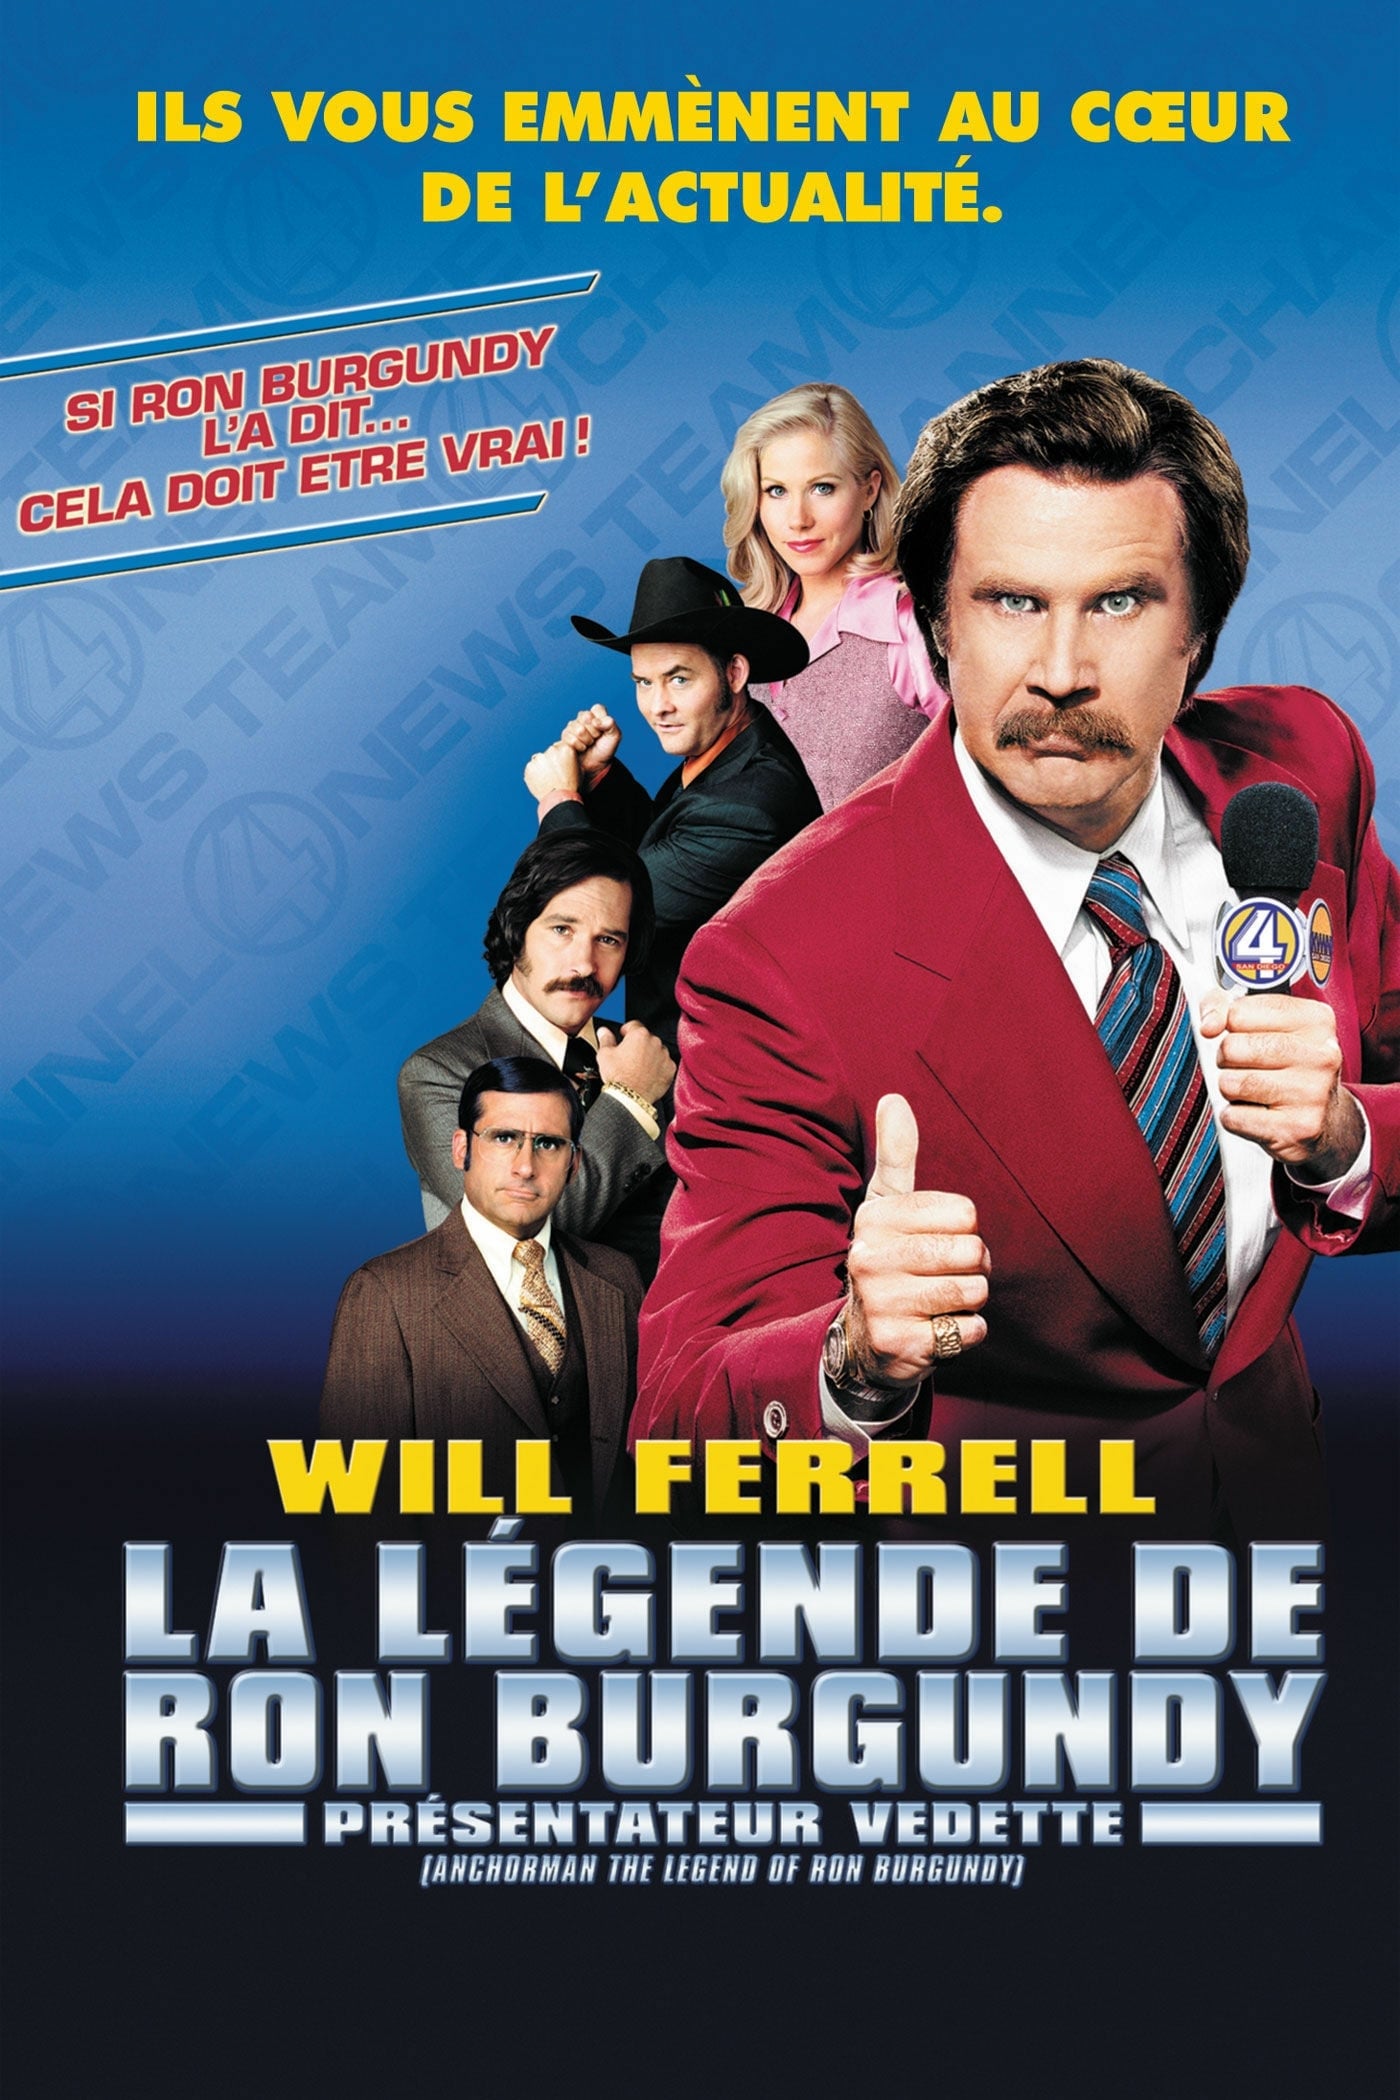 2004 Anchorman: The Legend Of Ron Burgundy